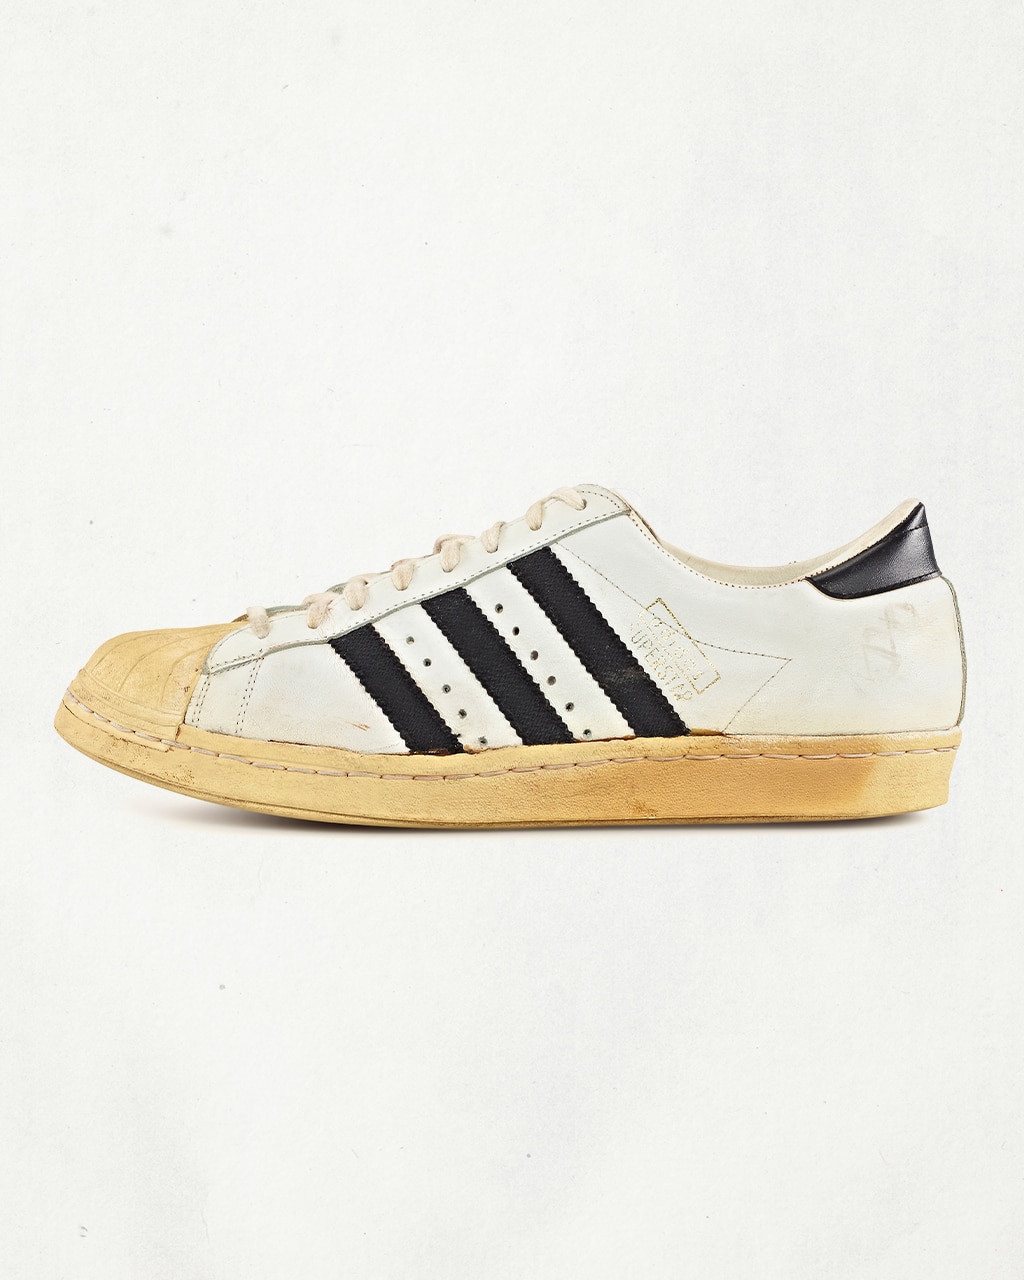 How The Adidas Superstar Turned Basketball (And Hip-Hop) On Its Head | The Journal MR PORTER